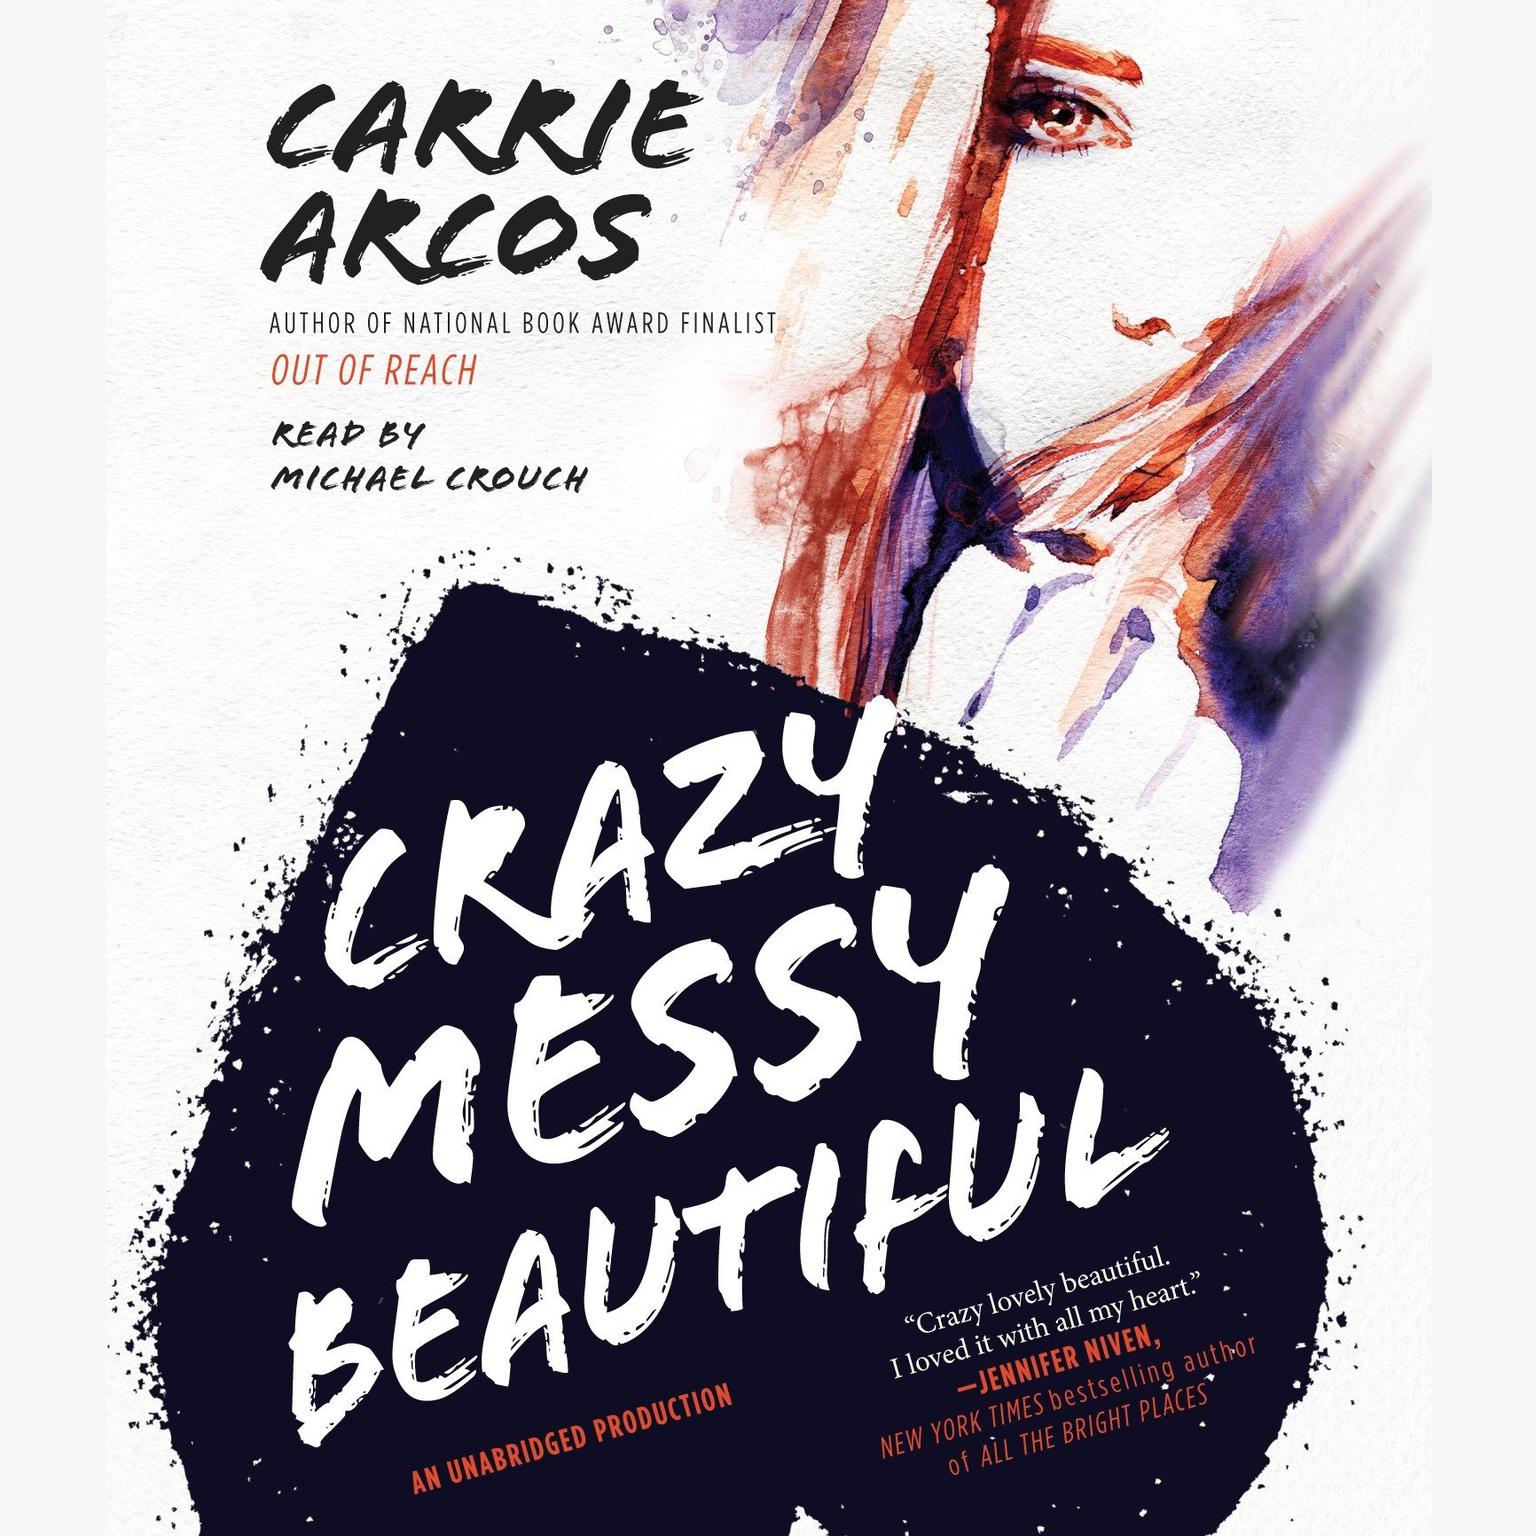 Crazy Messy Beautiful Audiobook, by Carrie Arcos